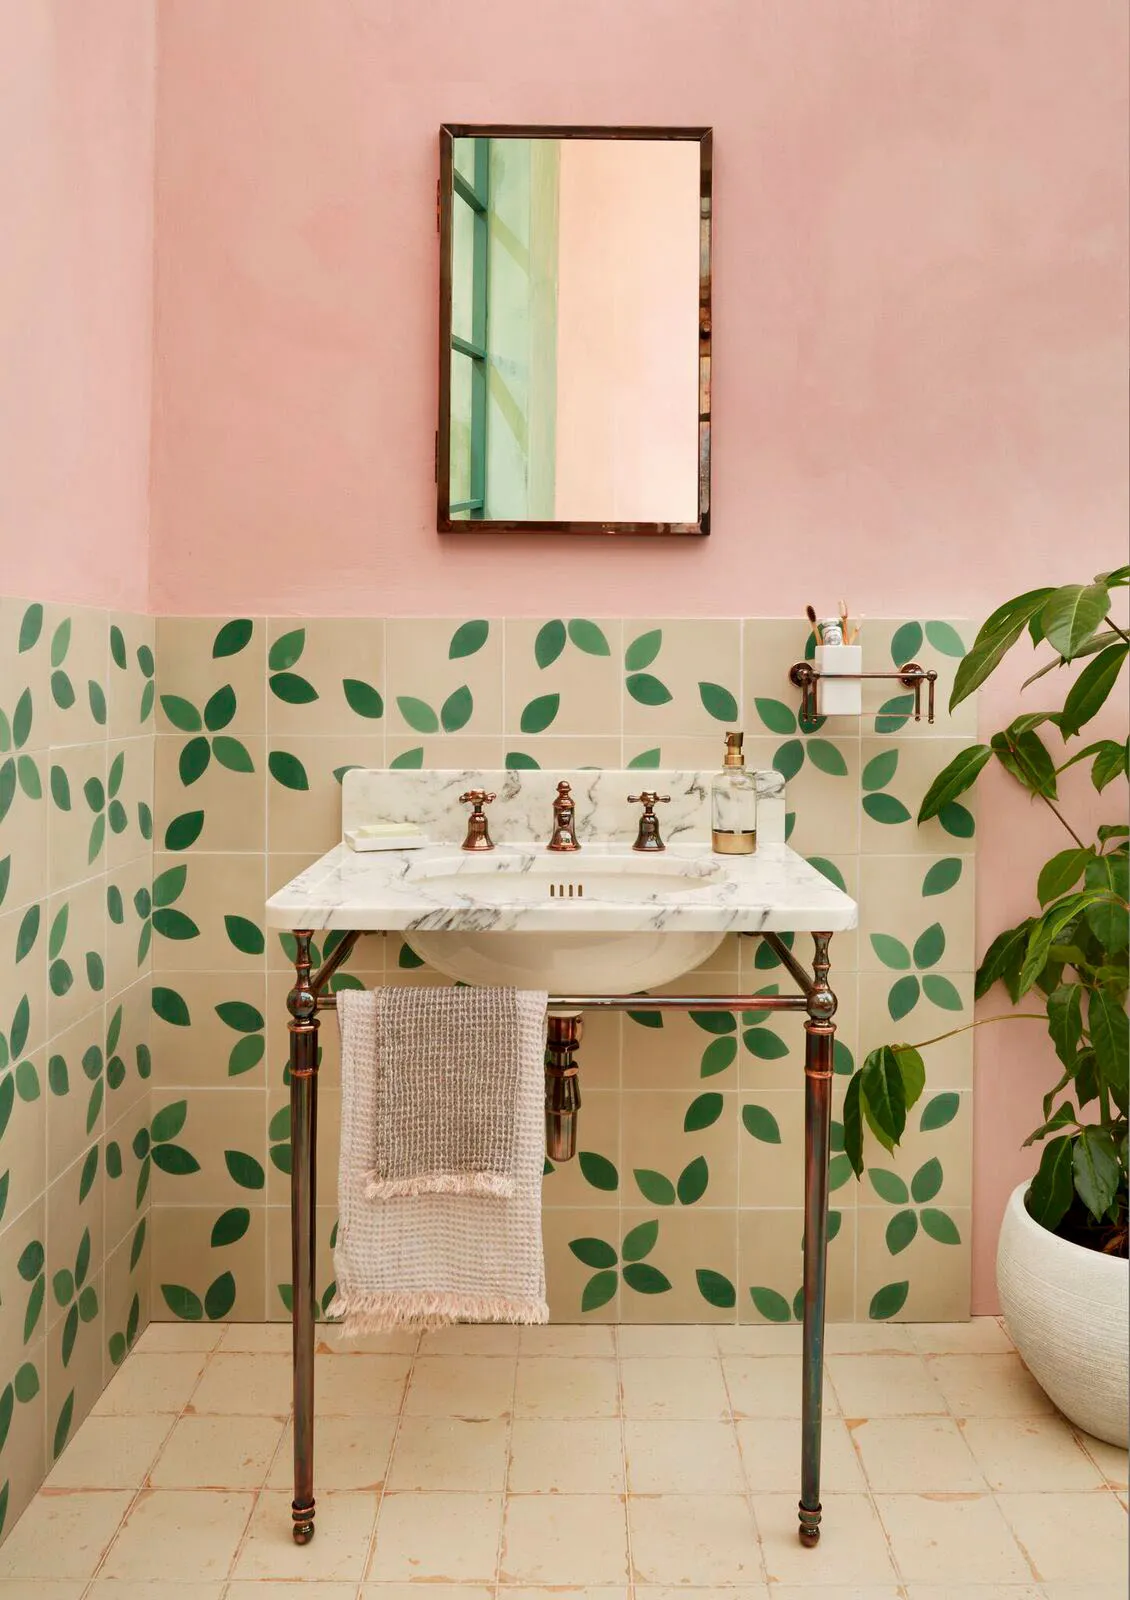 Orchard tiles in Basil/Cream from Marrakech Design in a pink bathroom with a traditional sink from Drummonds